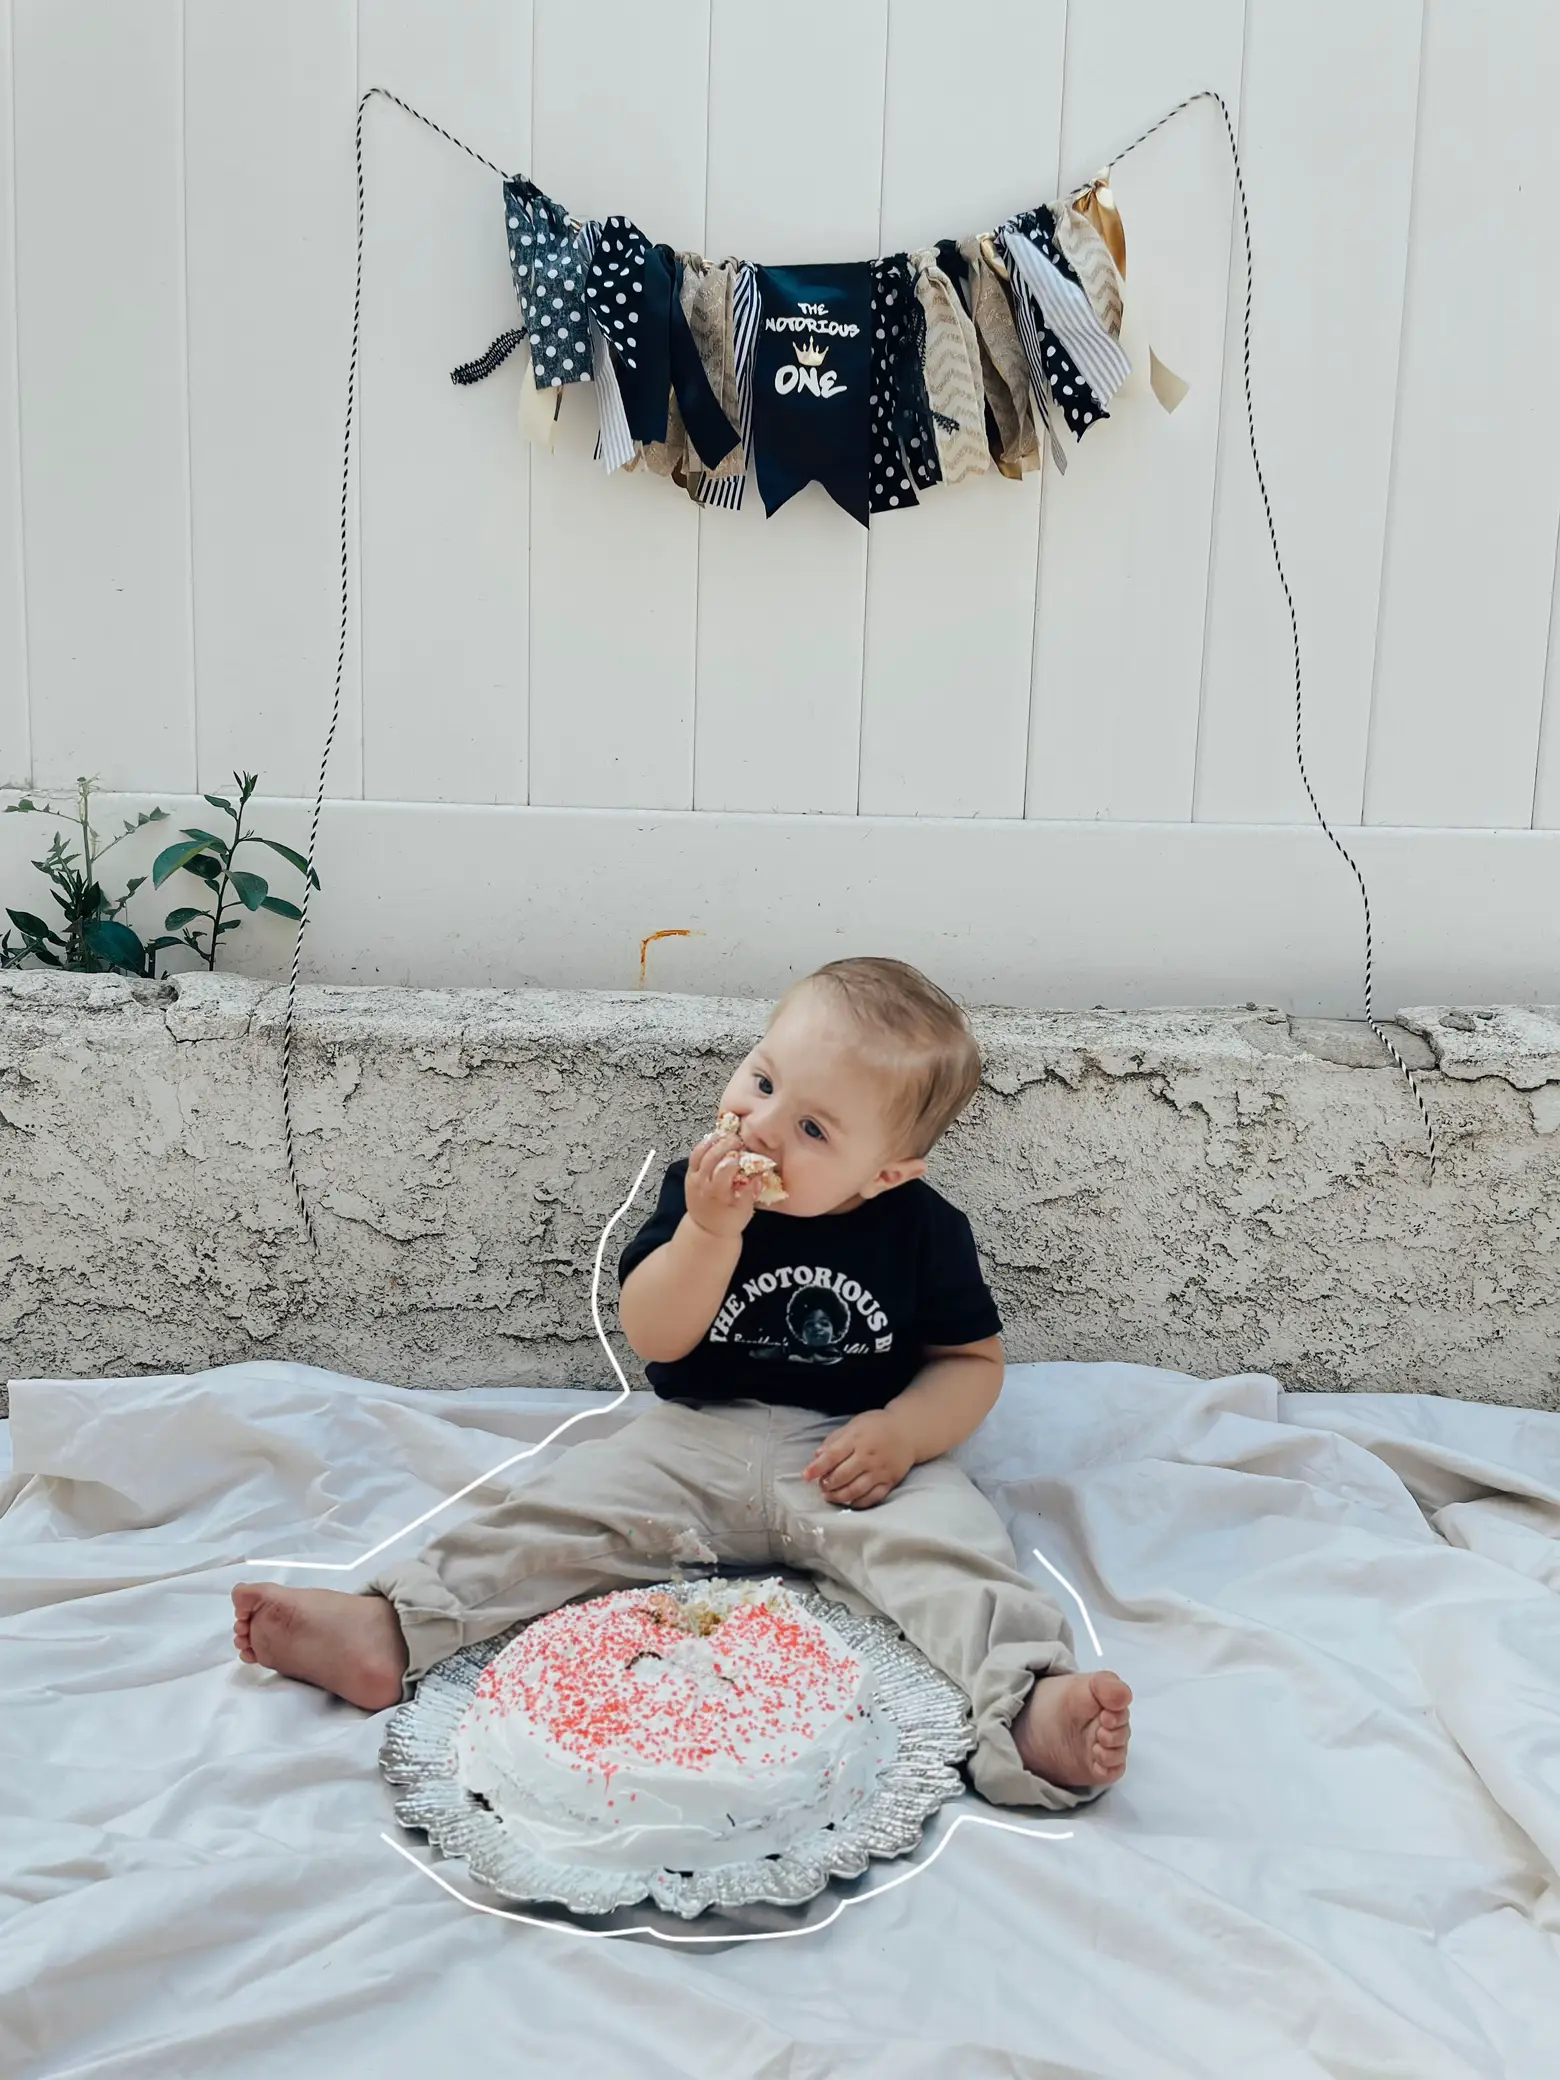 Wild One First Birthday/Cake Smash Outfit – Making Memories